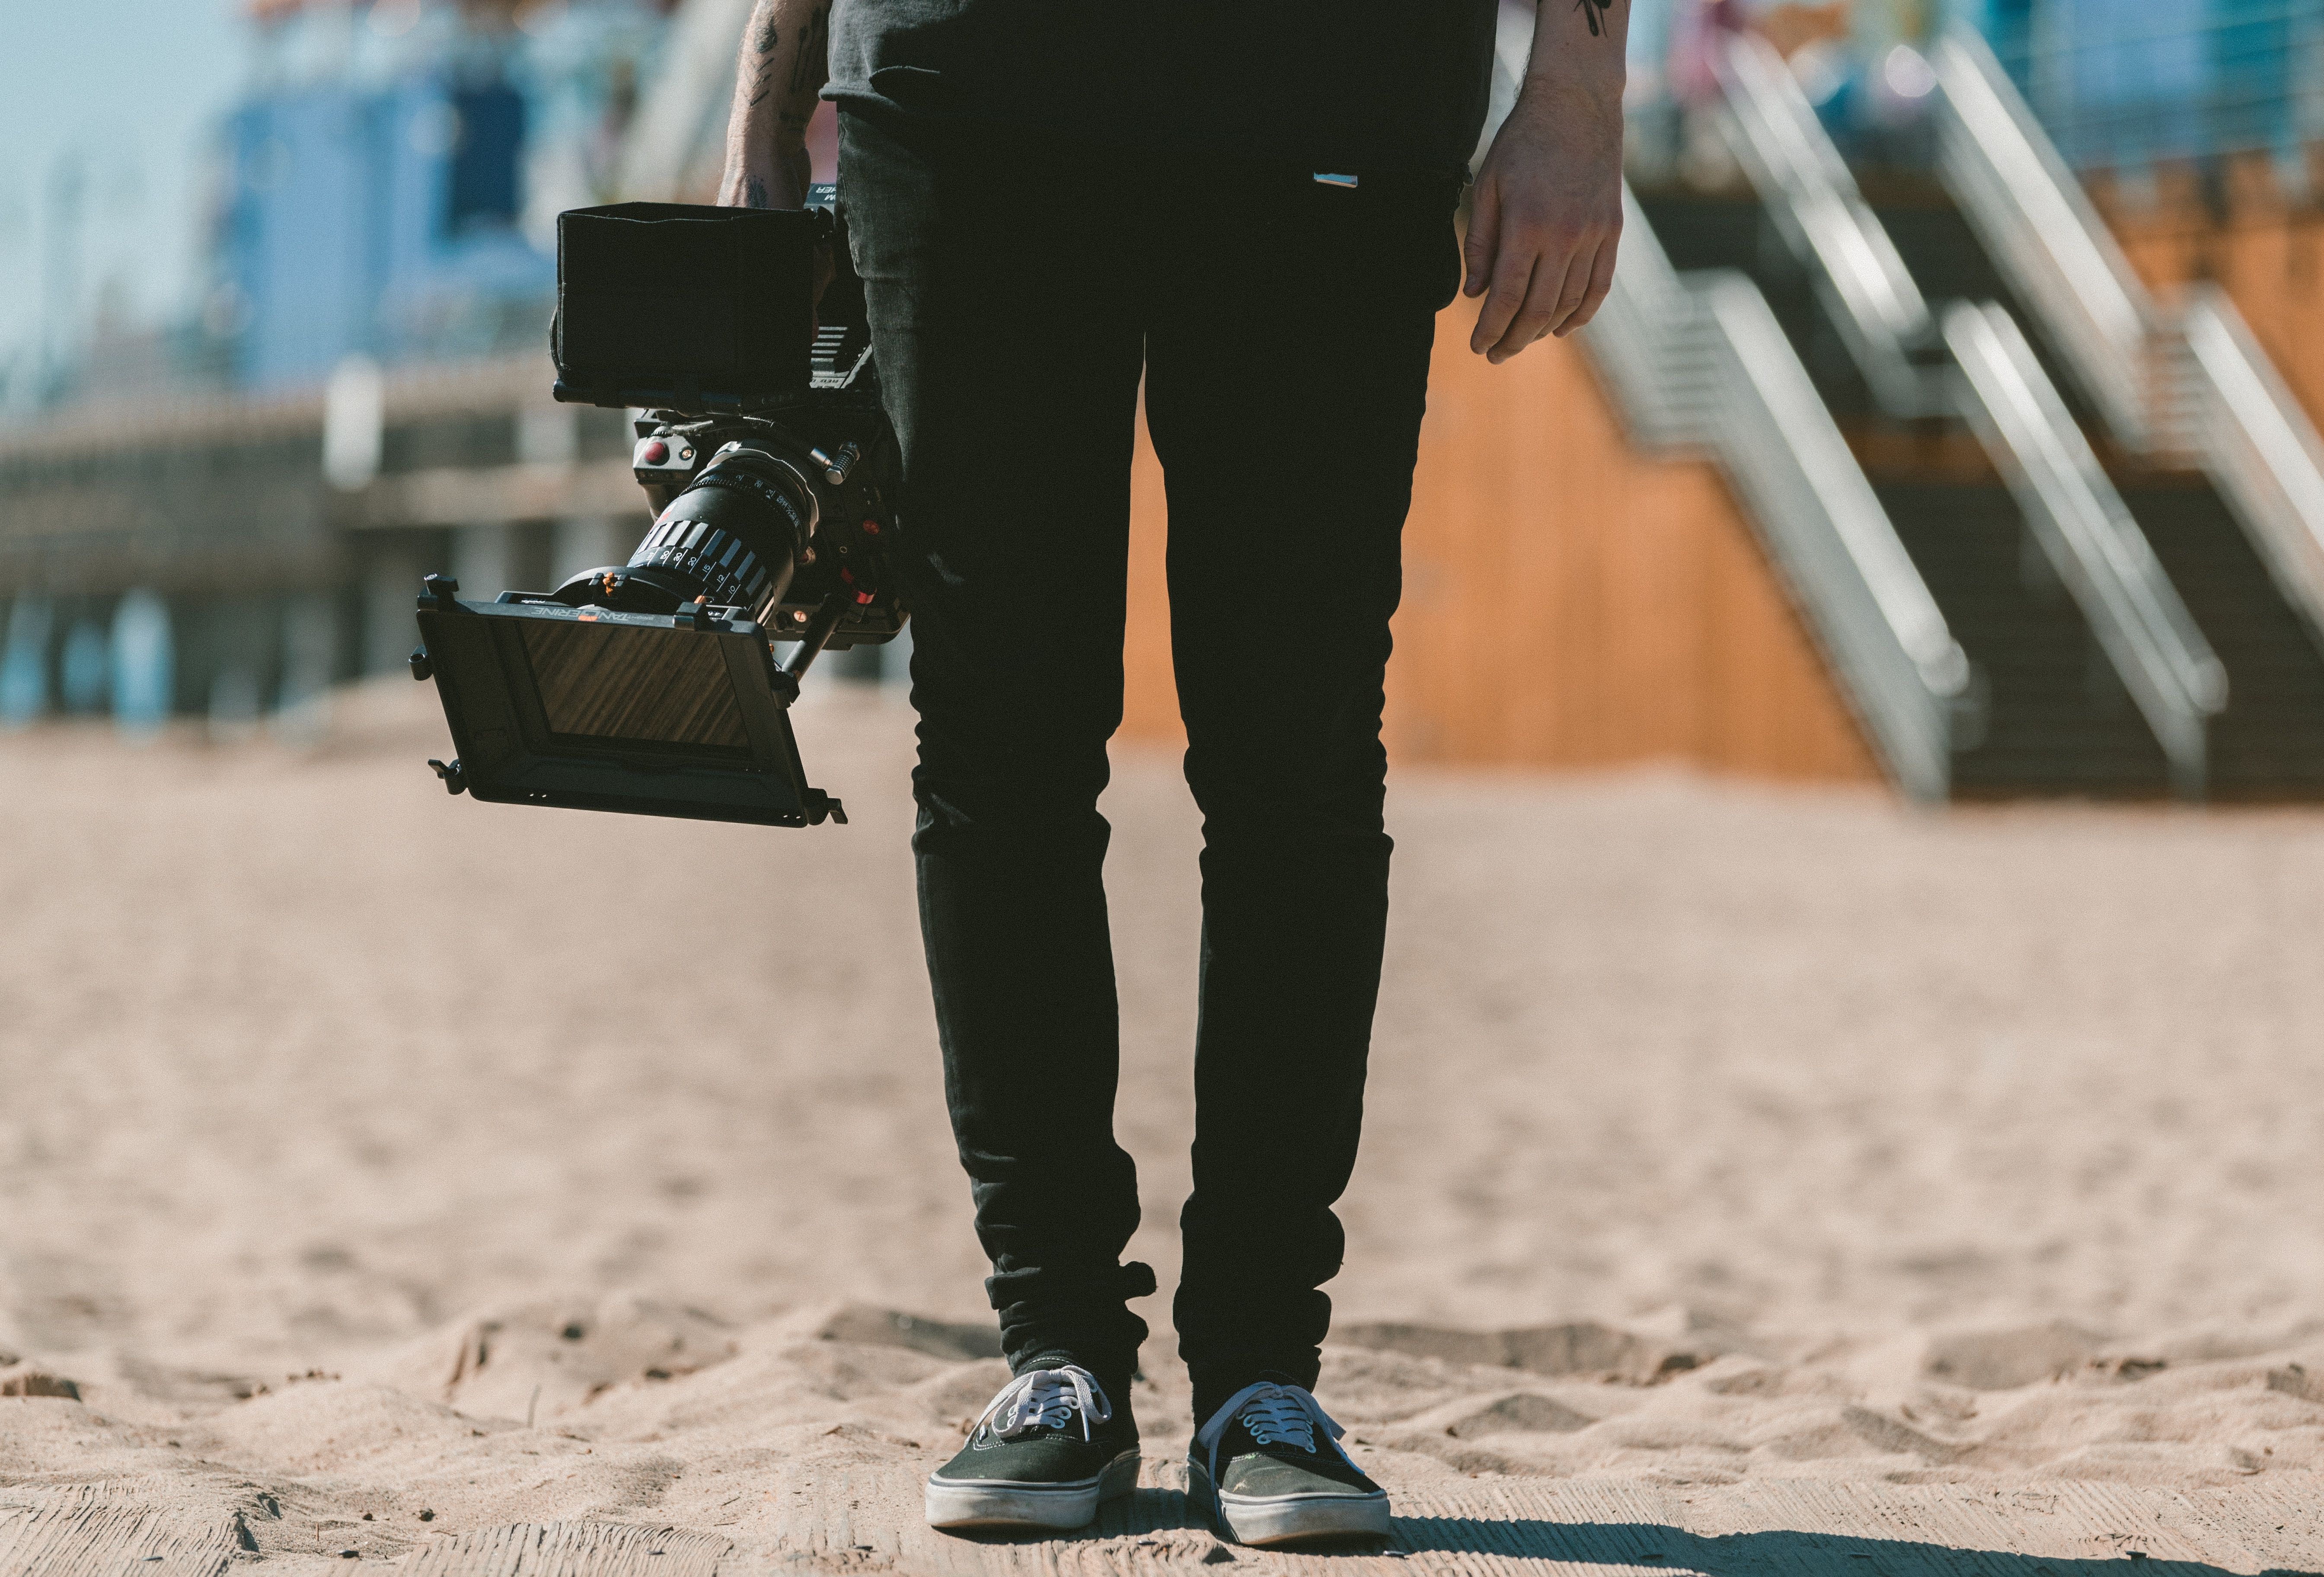 5376x3648 #Free image, #outdoor, #man, #videography, #shoe, #video camera, #caucasian, #video, #film camera, #hold, #equipment, #person, #guy, #holding, #leg, #photo, #camera, #sand, #beach, #male, #tattoo